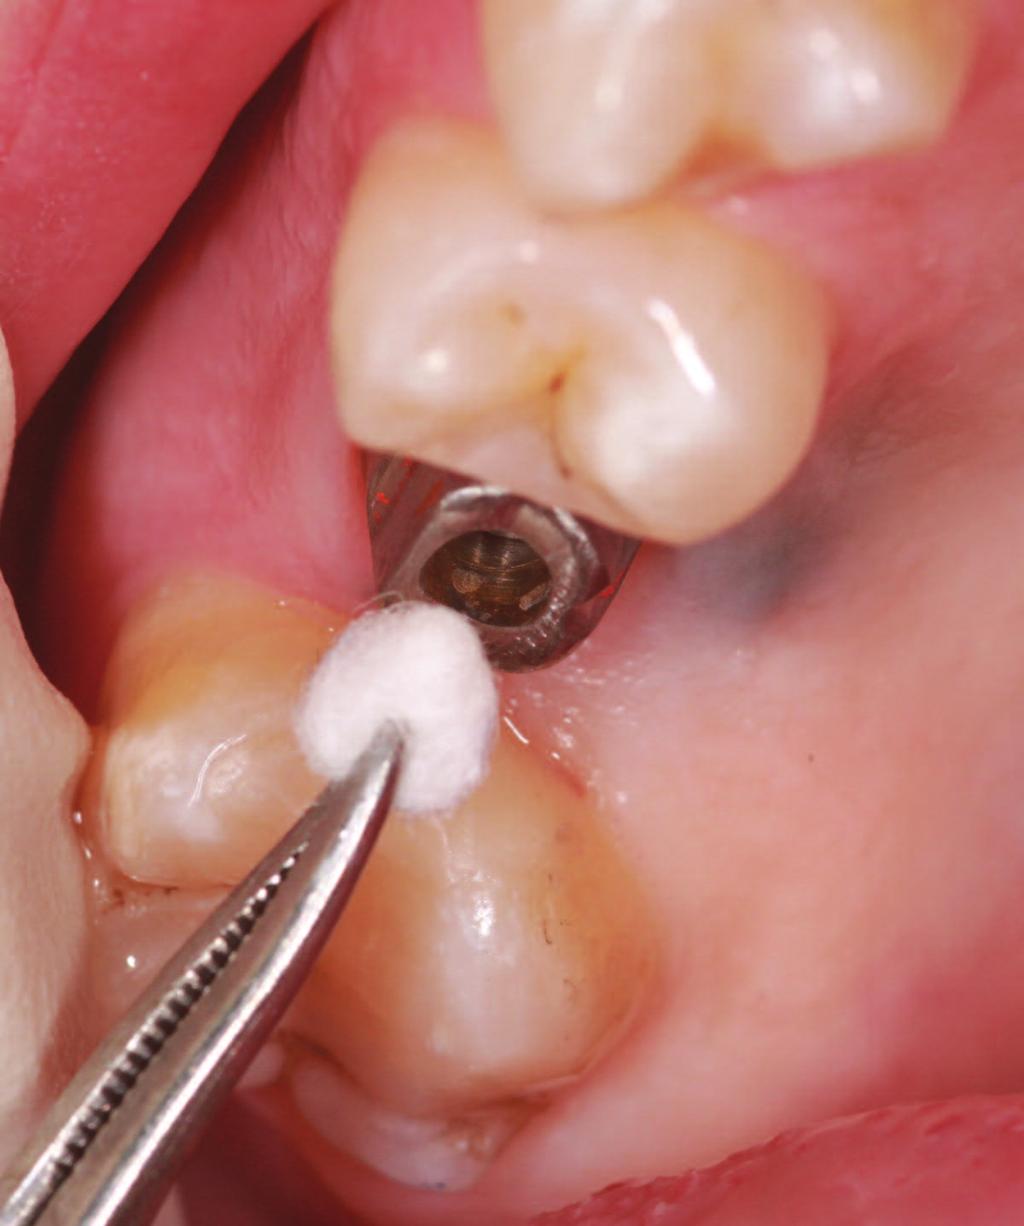 Figure 20 Cotton pellet placed in abutment screw hole to prevent the cement from obstructing access